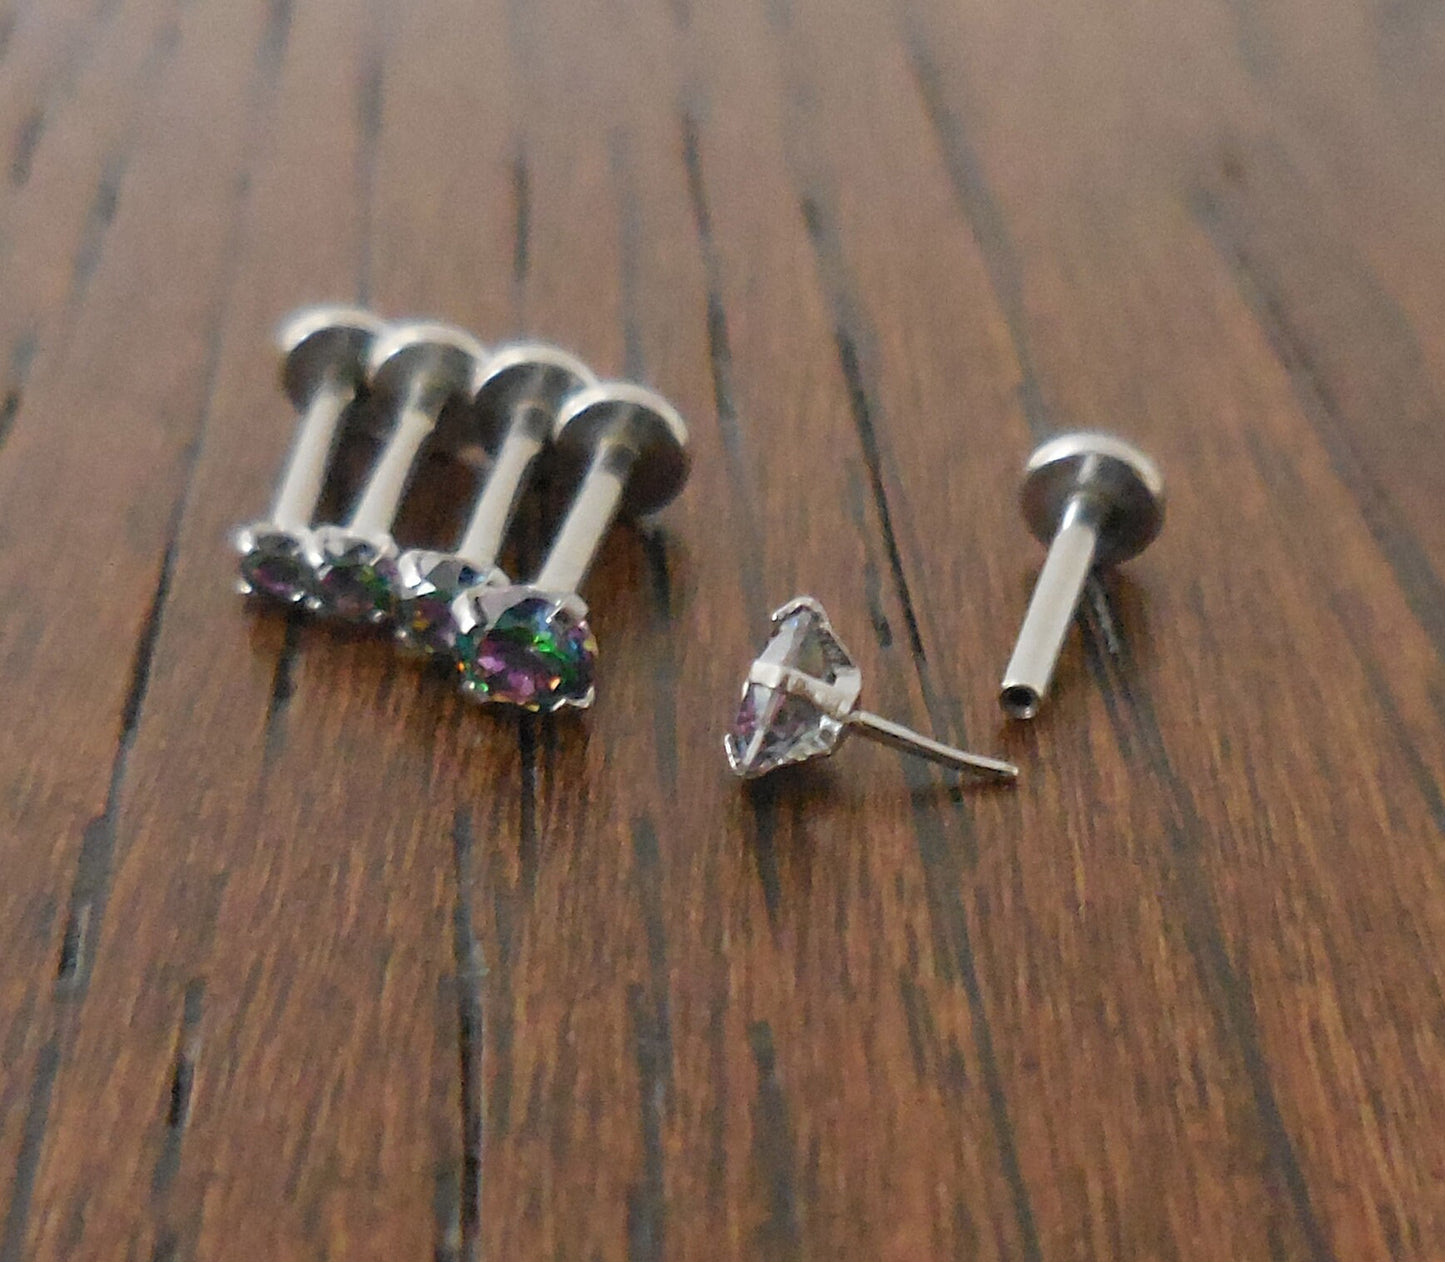 18G 2-4mm Tragus Rainbow Prong Set CZ Stone Threadless 6mm-8mm Push Pin Triple Forward Helix Nose Ring Labret Lip Earrings Stainless Steel